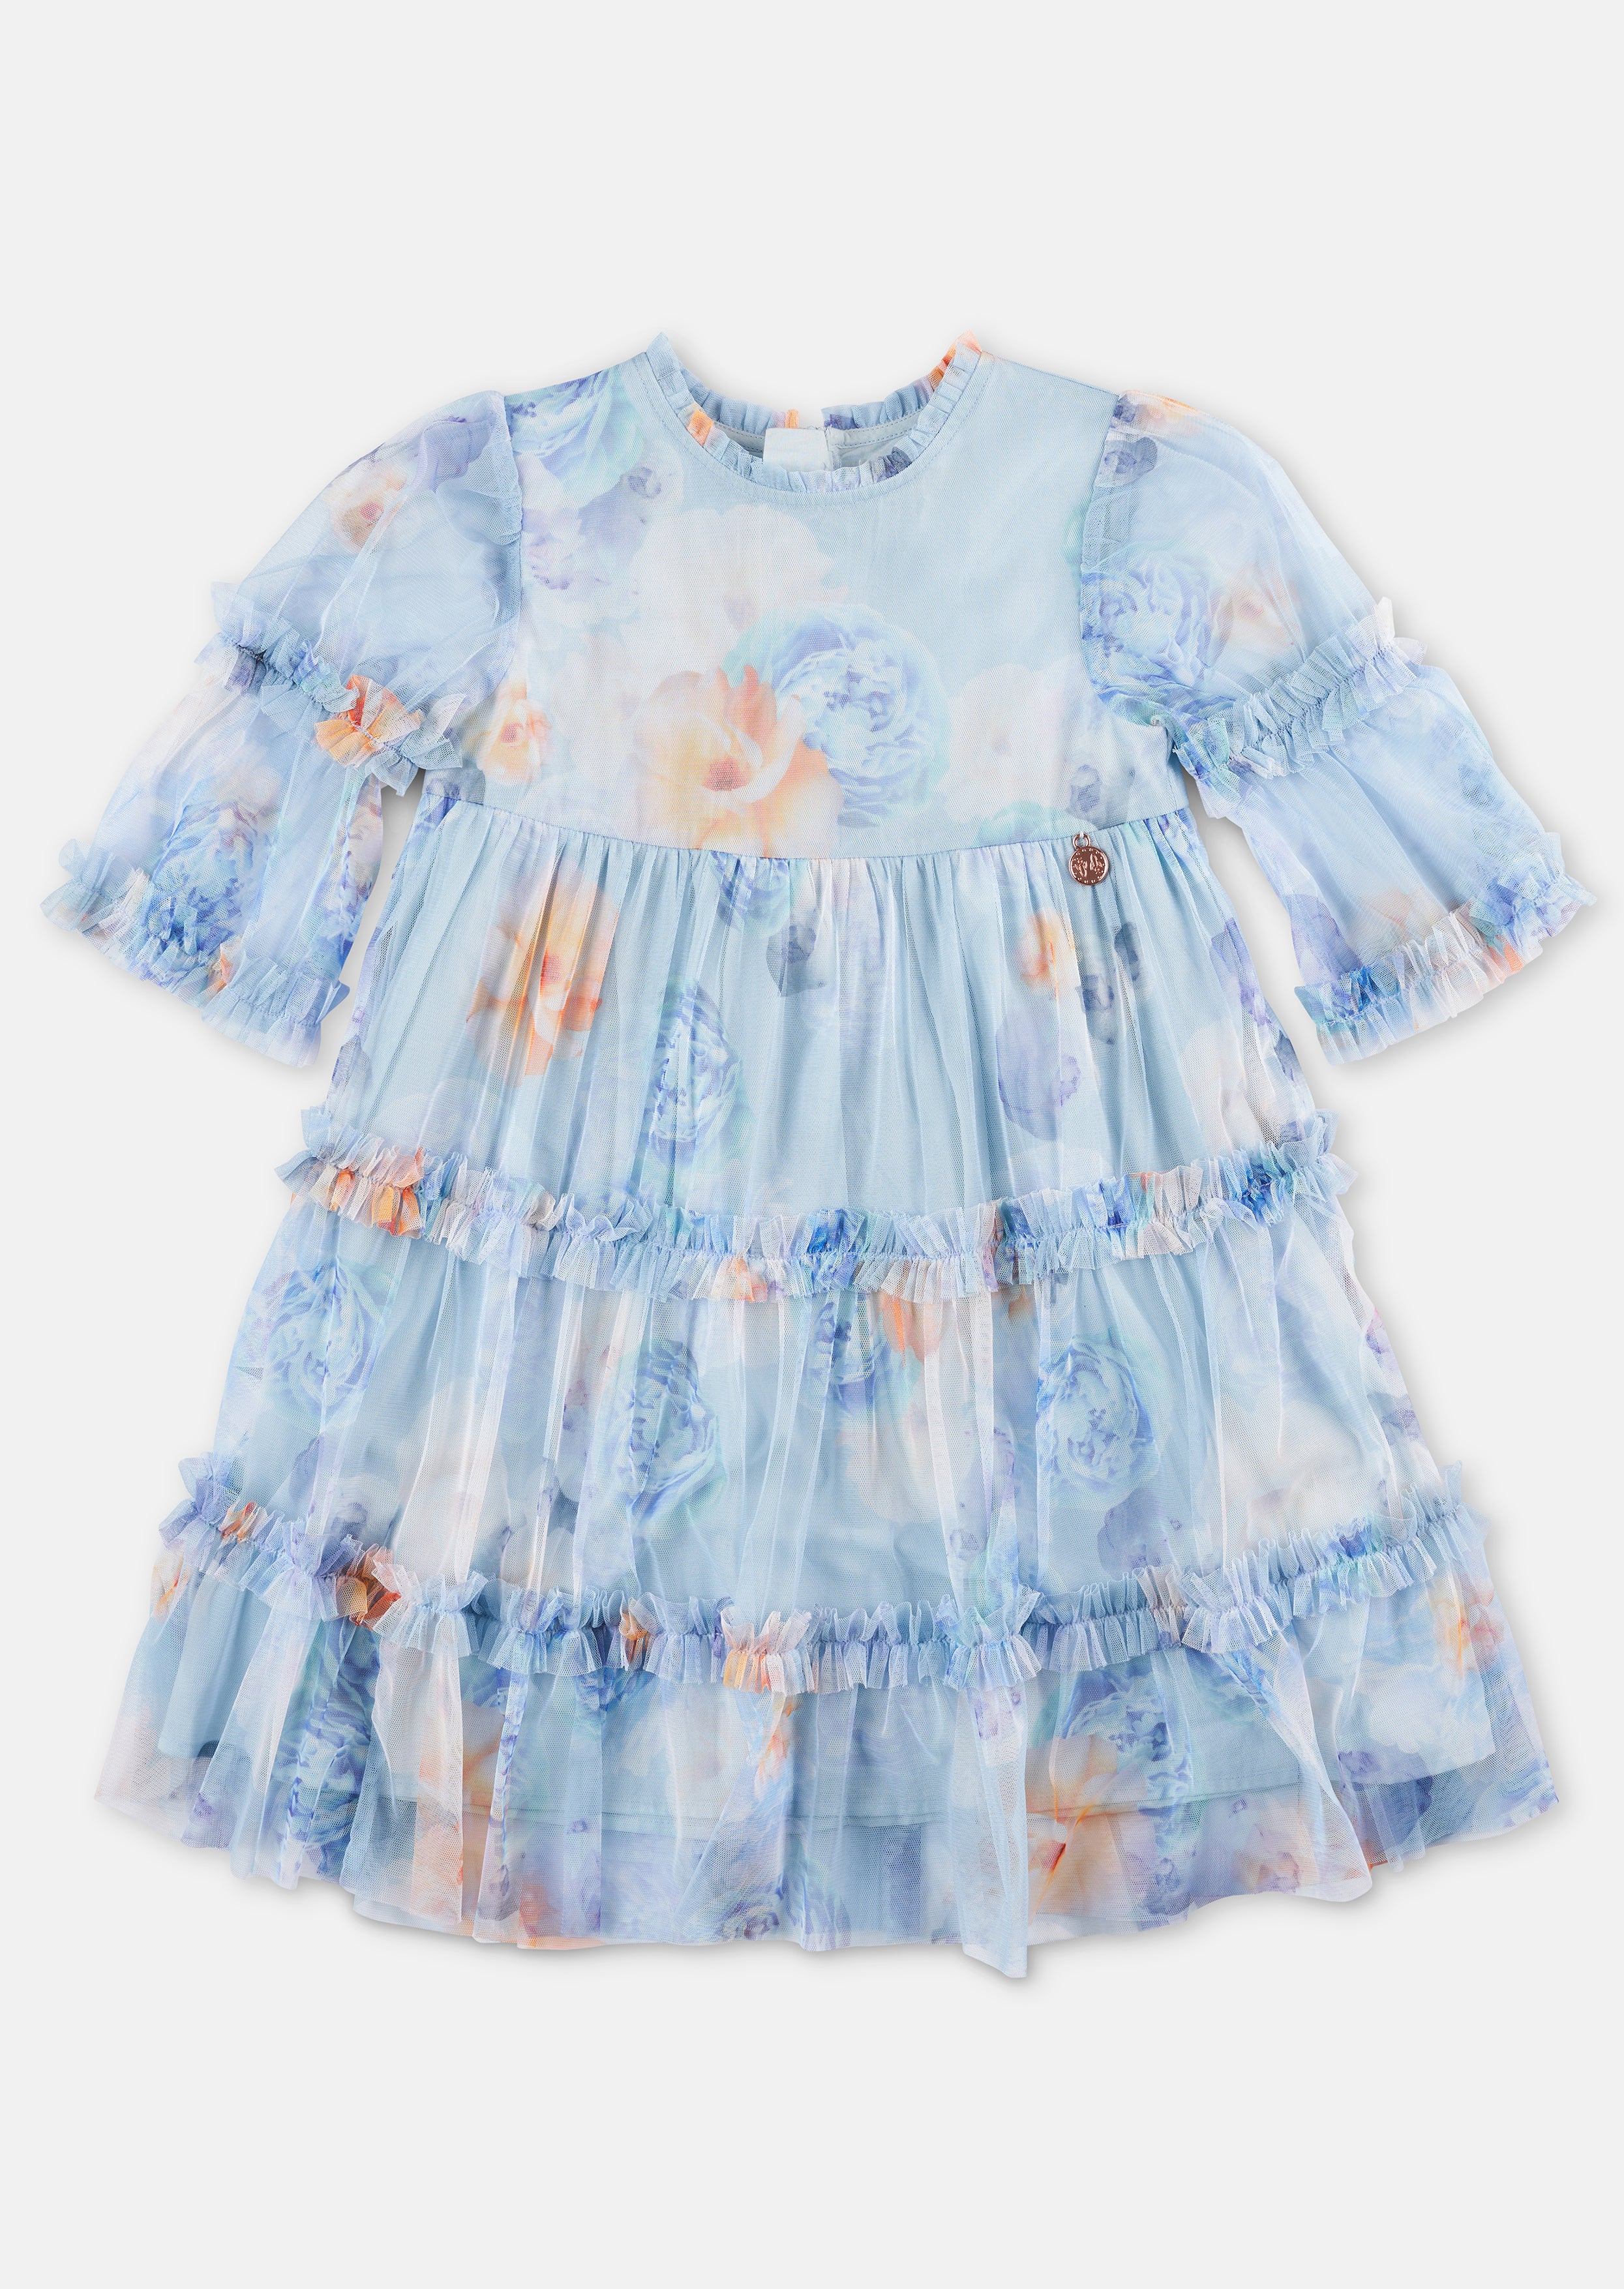 Girls Floral printed Blue Mesh Dress with Puff Sleeves